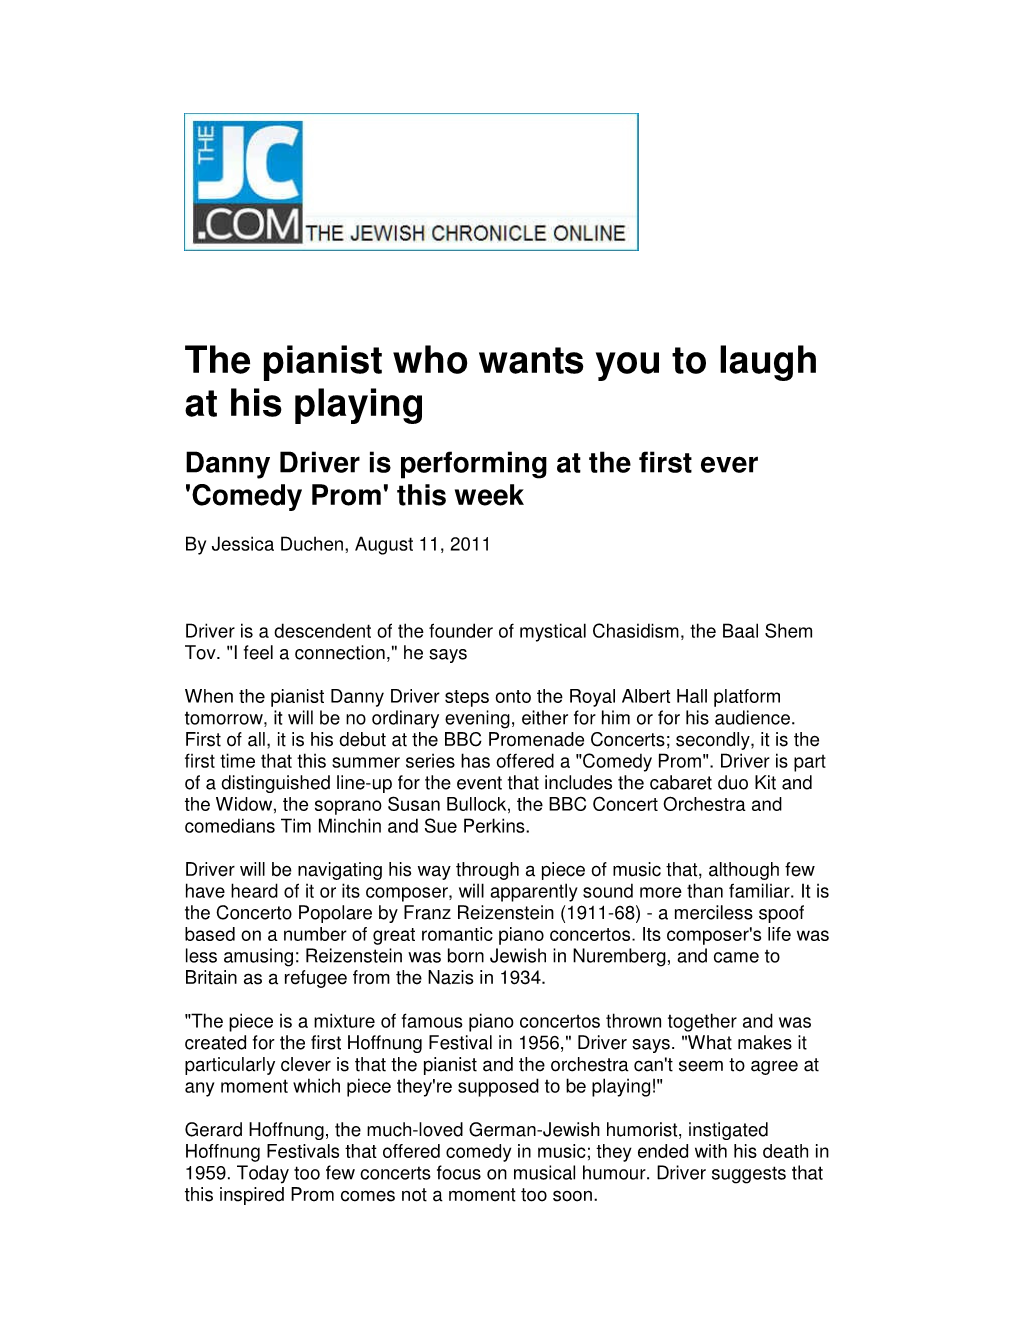 The Pianist Who Wants You to Laugh at His Playing Danny Driver Is Performing at the First Ever 'Comedy Prom' This Week